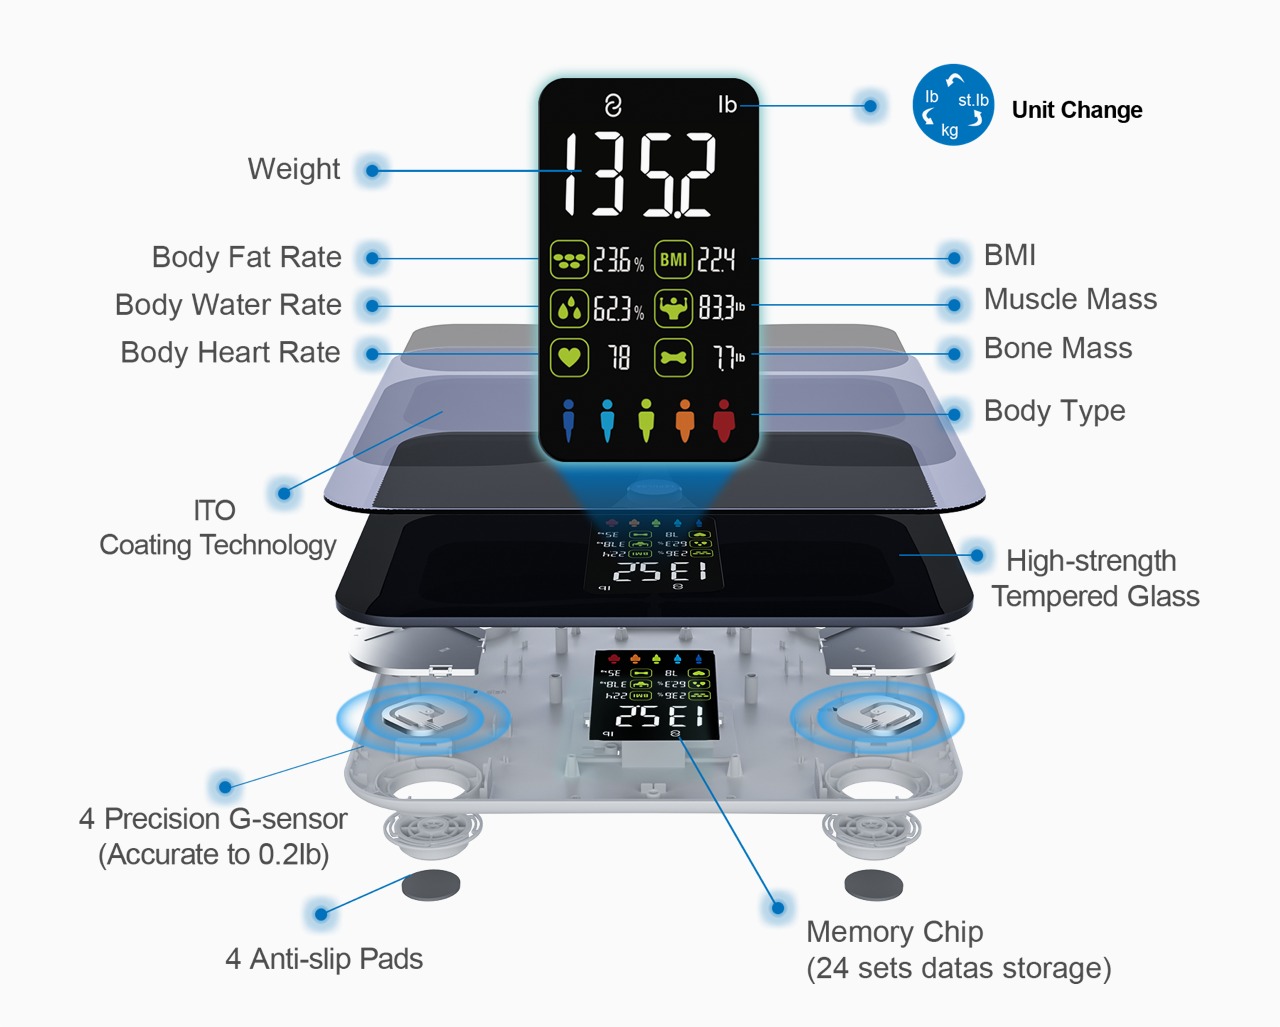 https://www.yankodesign.com/images/design_news/2022/09/the-best-smart-weighing-scale-on-a-budget-lets-you-calculate-everything-from-your-bmi-to-even-your-muscle-mass/household_smart_body_fat_scale_03.jpg